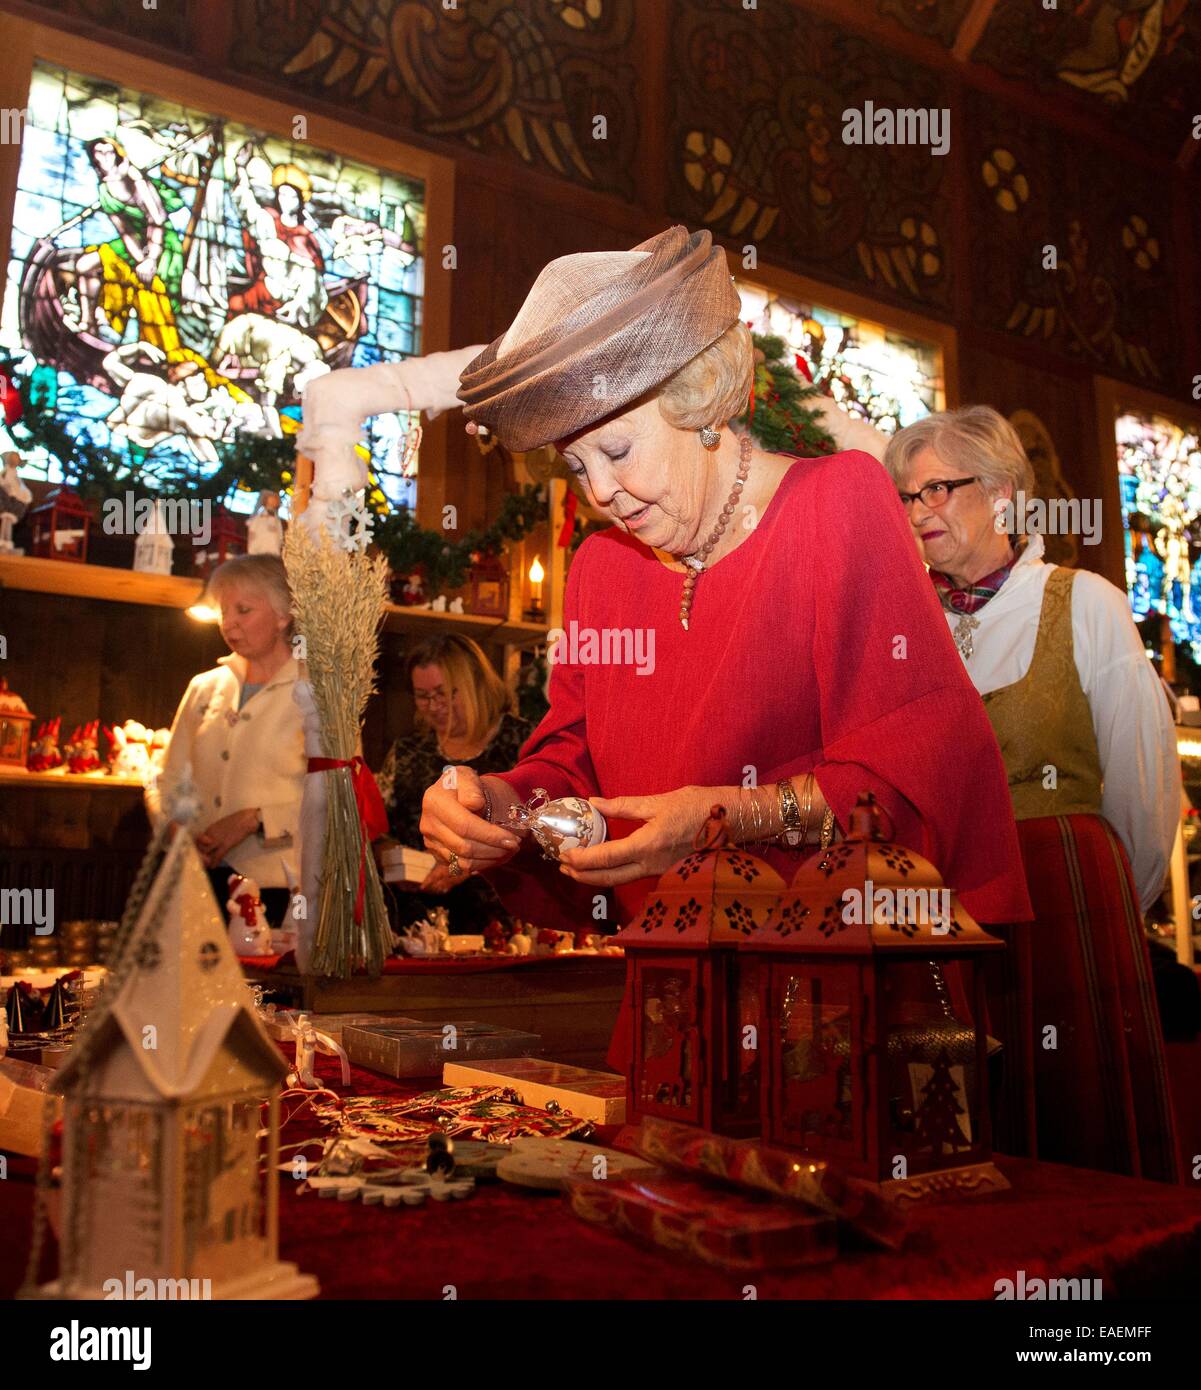 Dutch Princess Beatrix opens the 90th Christmas market in the Norwegian Church in Rotterdam, 13 November 2014. Norwegian products are sold at the annual Christmas market. The proceeds of the Christmas benefit is the preservation of the Church, since 2000 a national monument. Photo: Albert Philip van der Werf/RPE/entert NO WIRE SERVICE Stock Photo